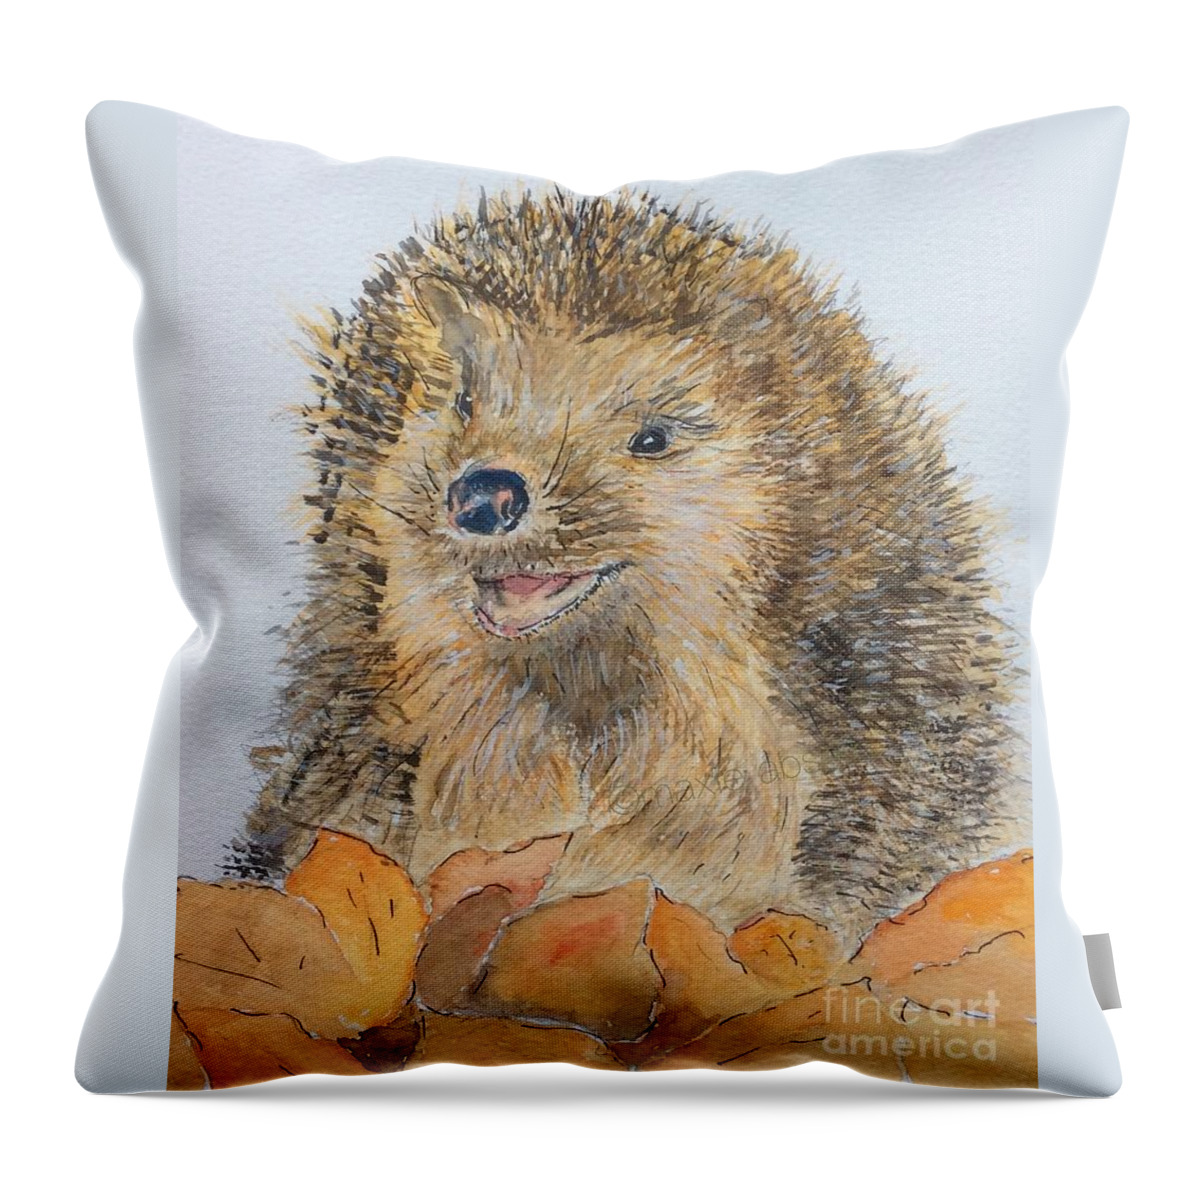 Hedgehog Throw Pillow featuring the painting Hearty Hedgehog by Maxie Absell